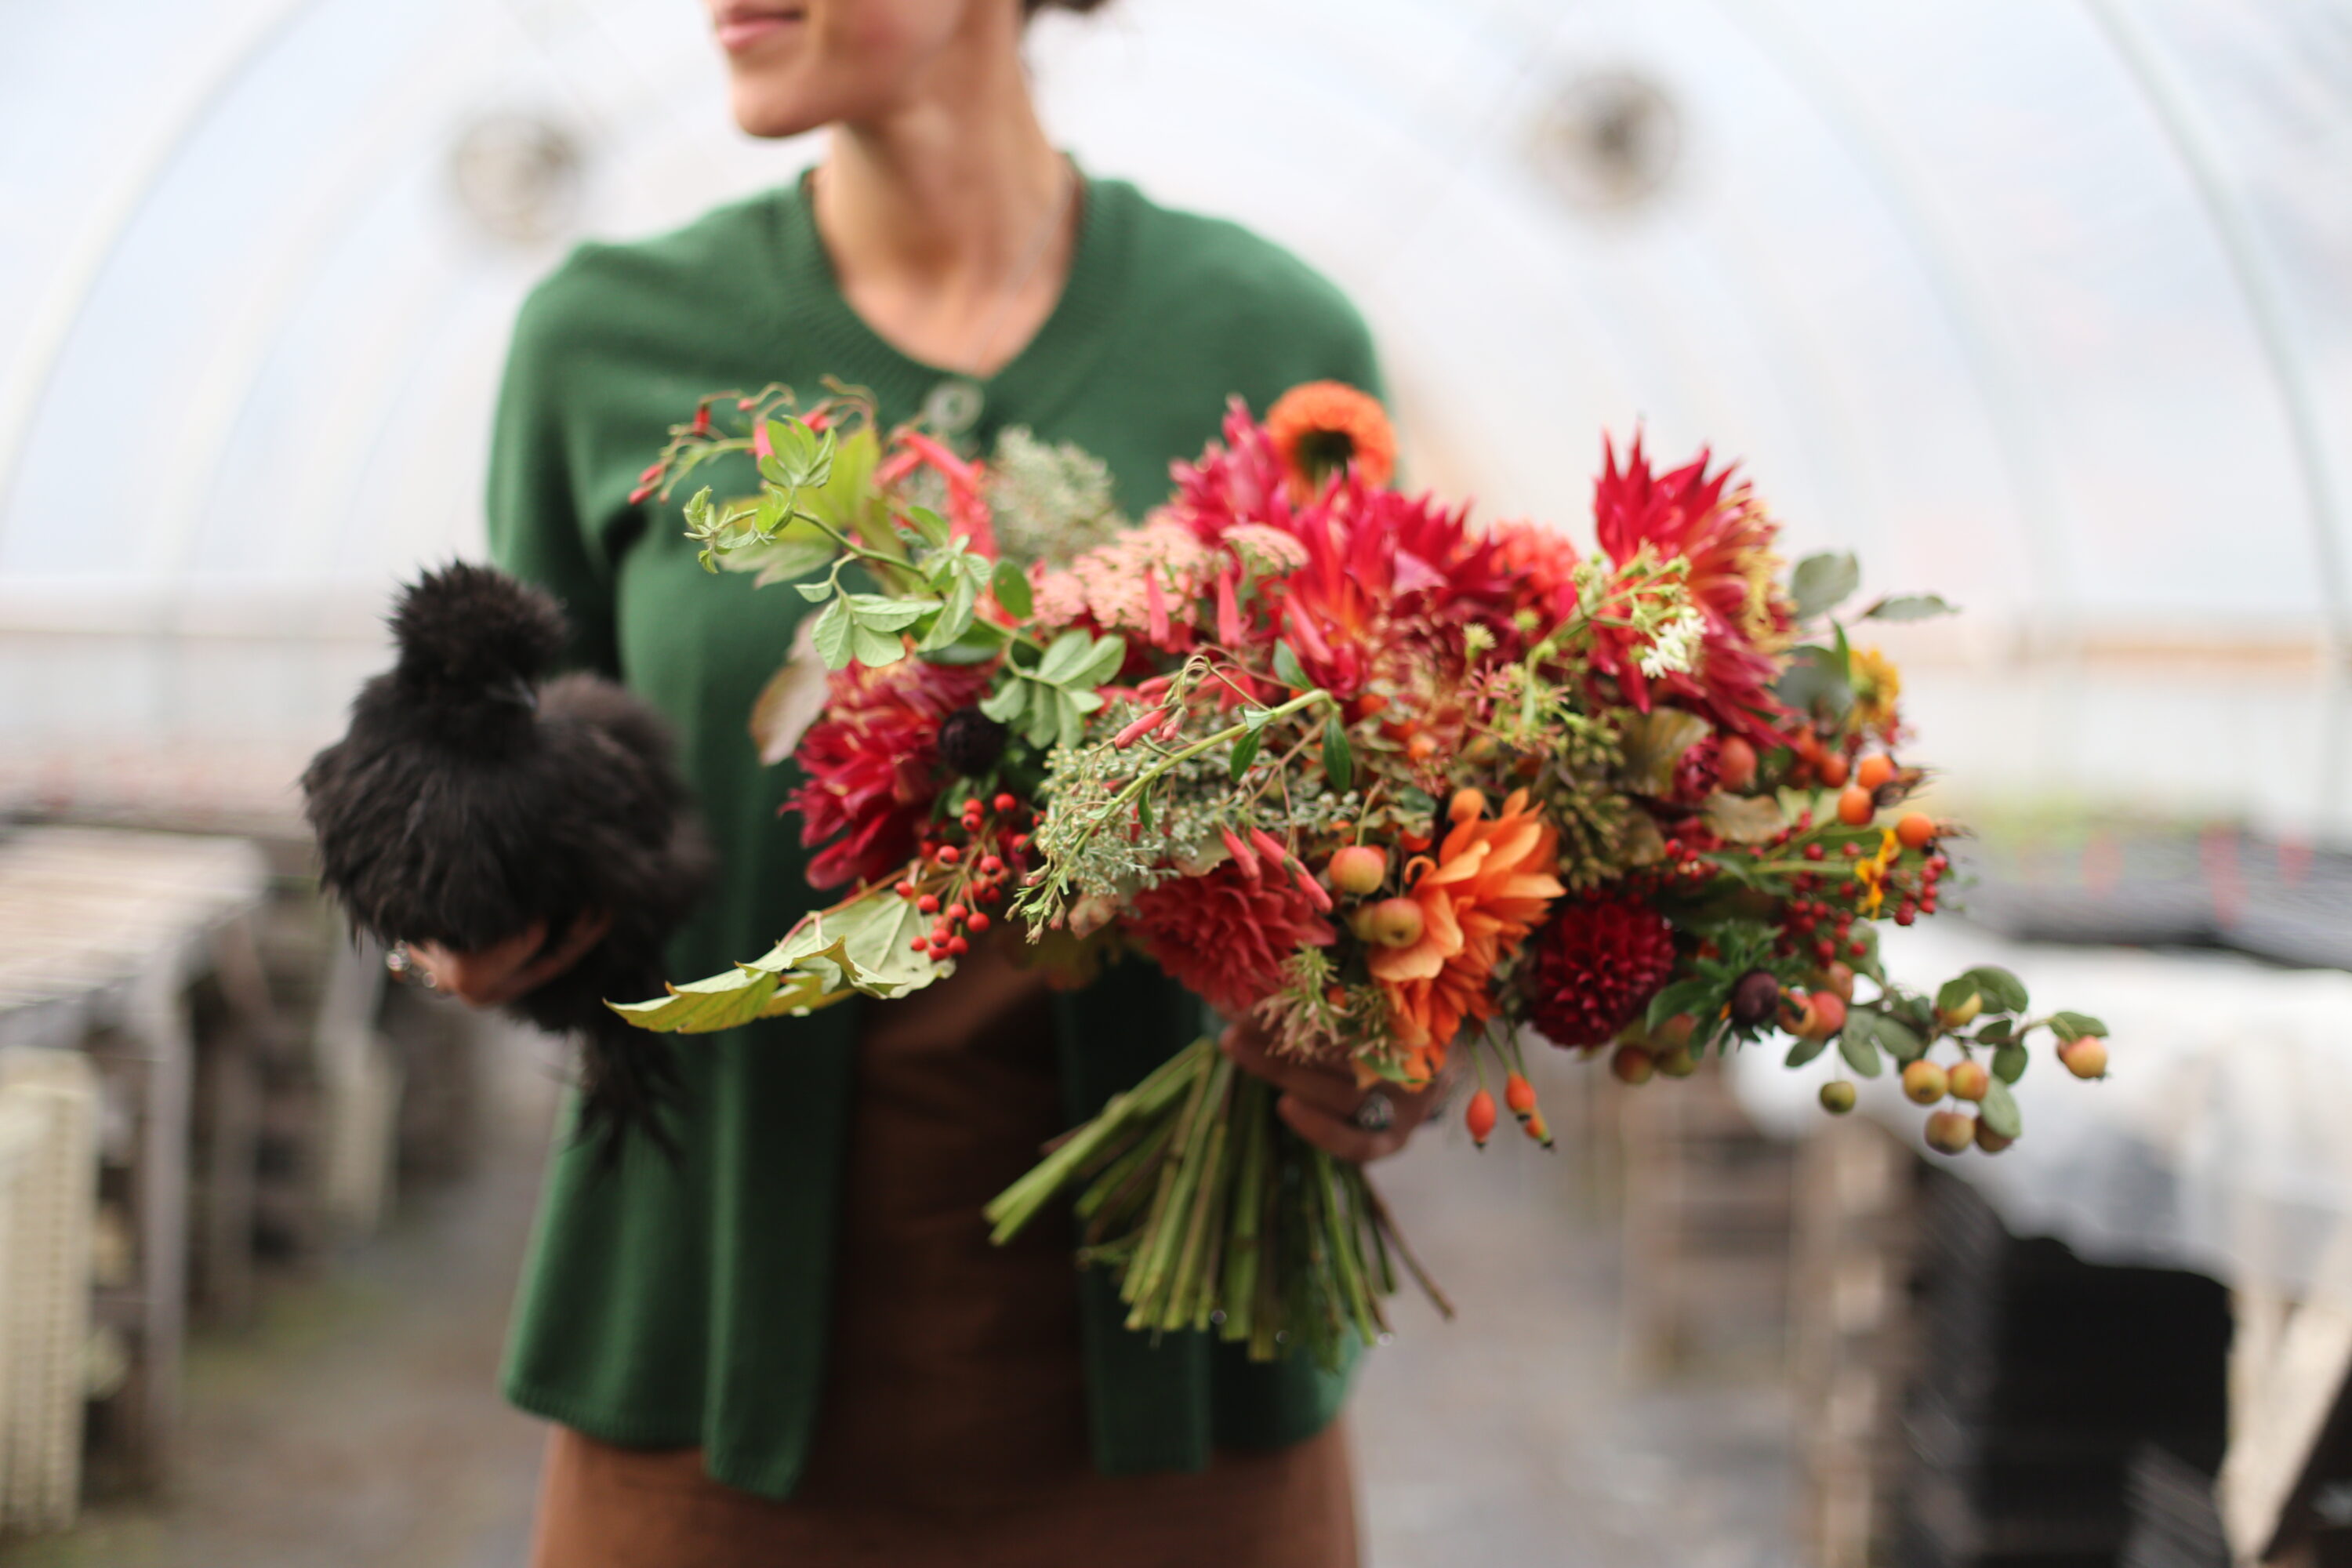 Erin Benzakein holding a bouquet and a chicken